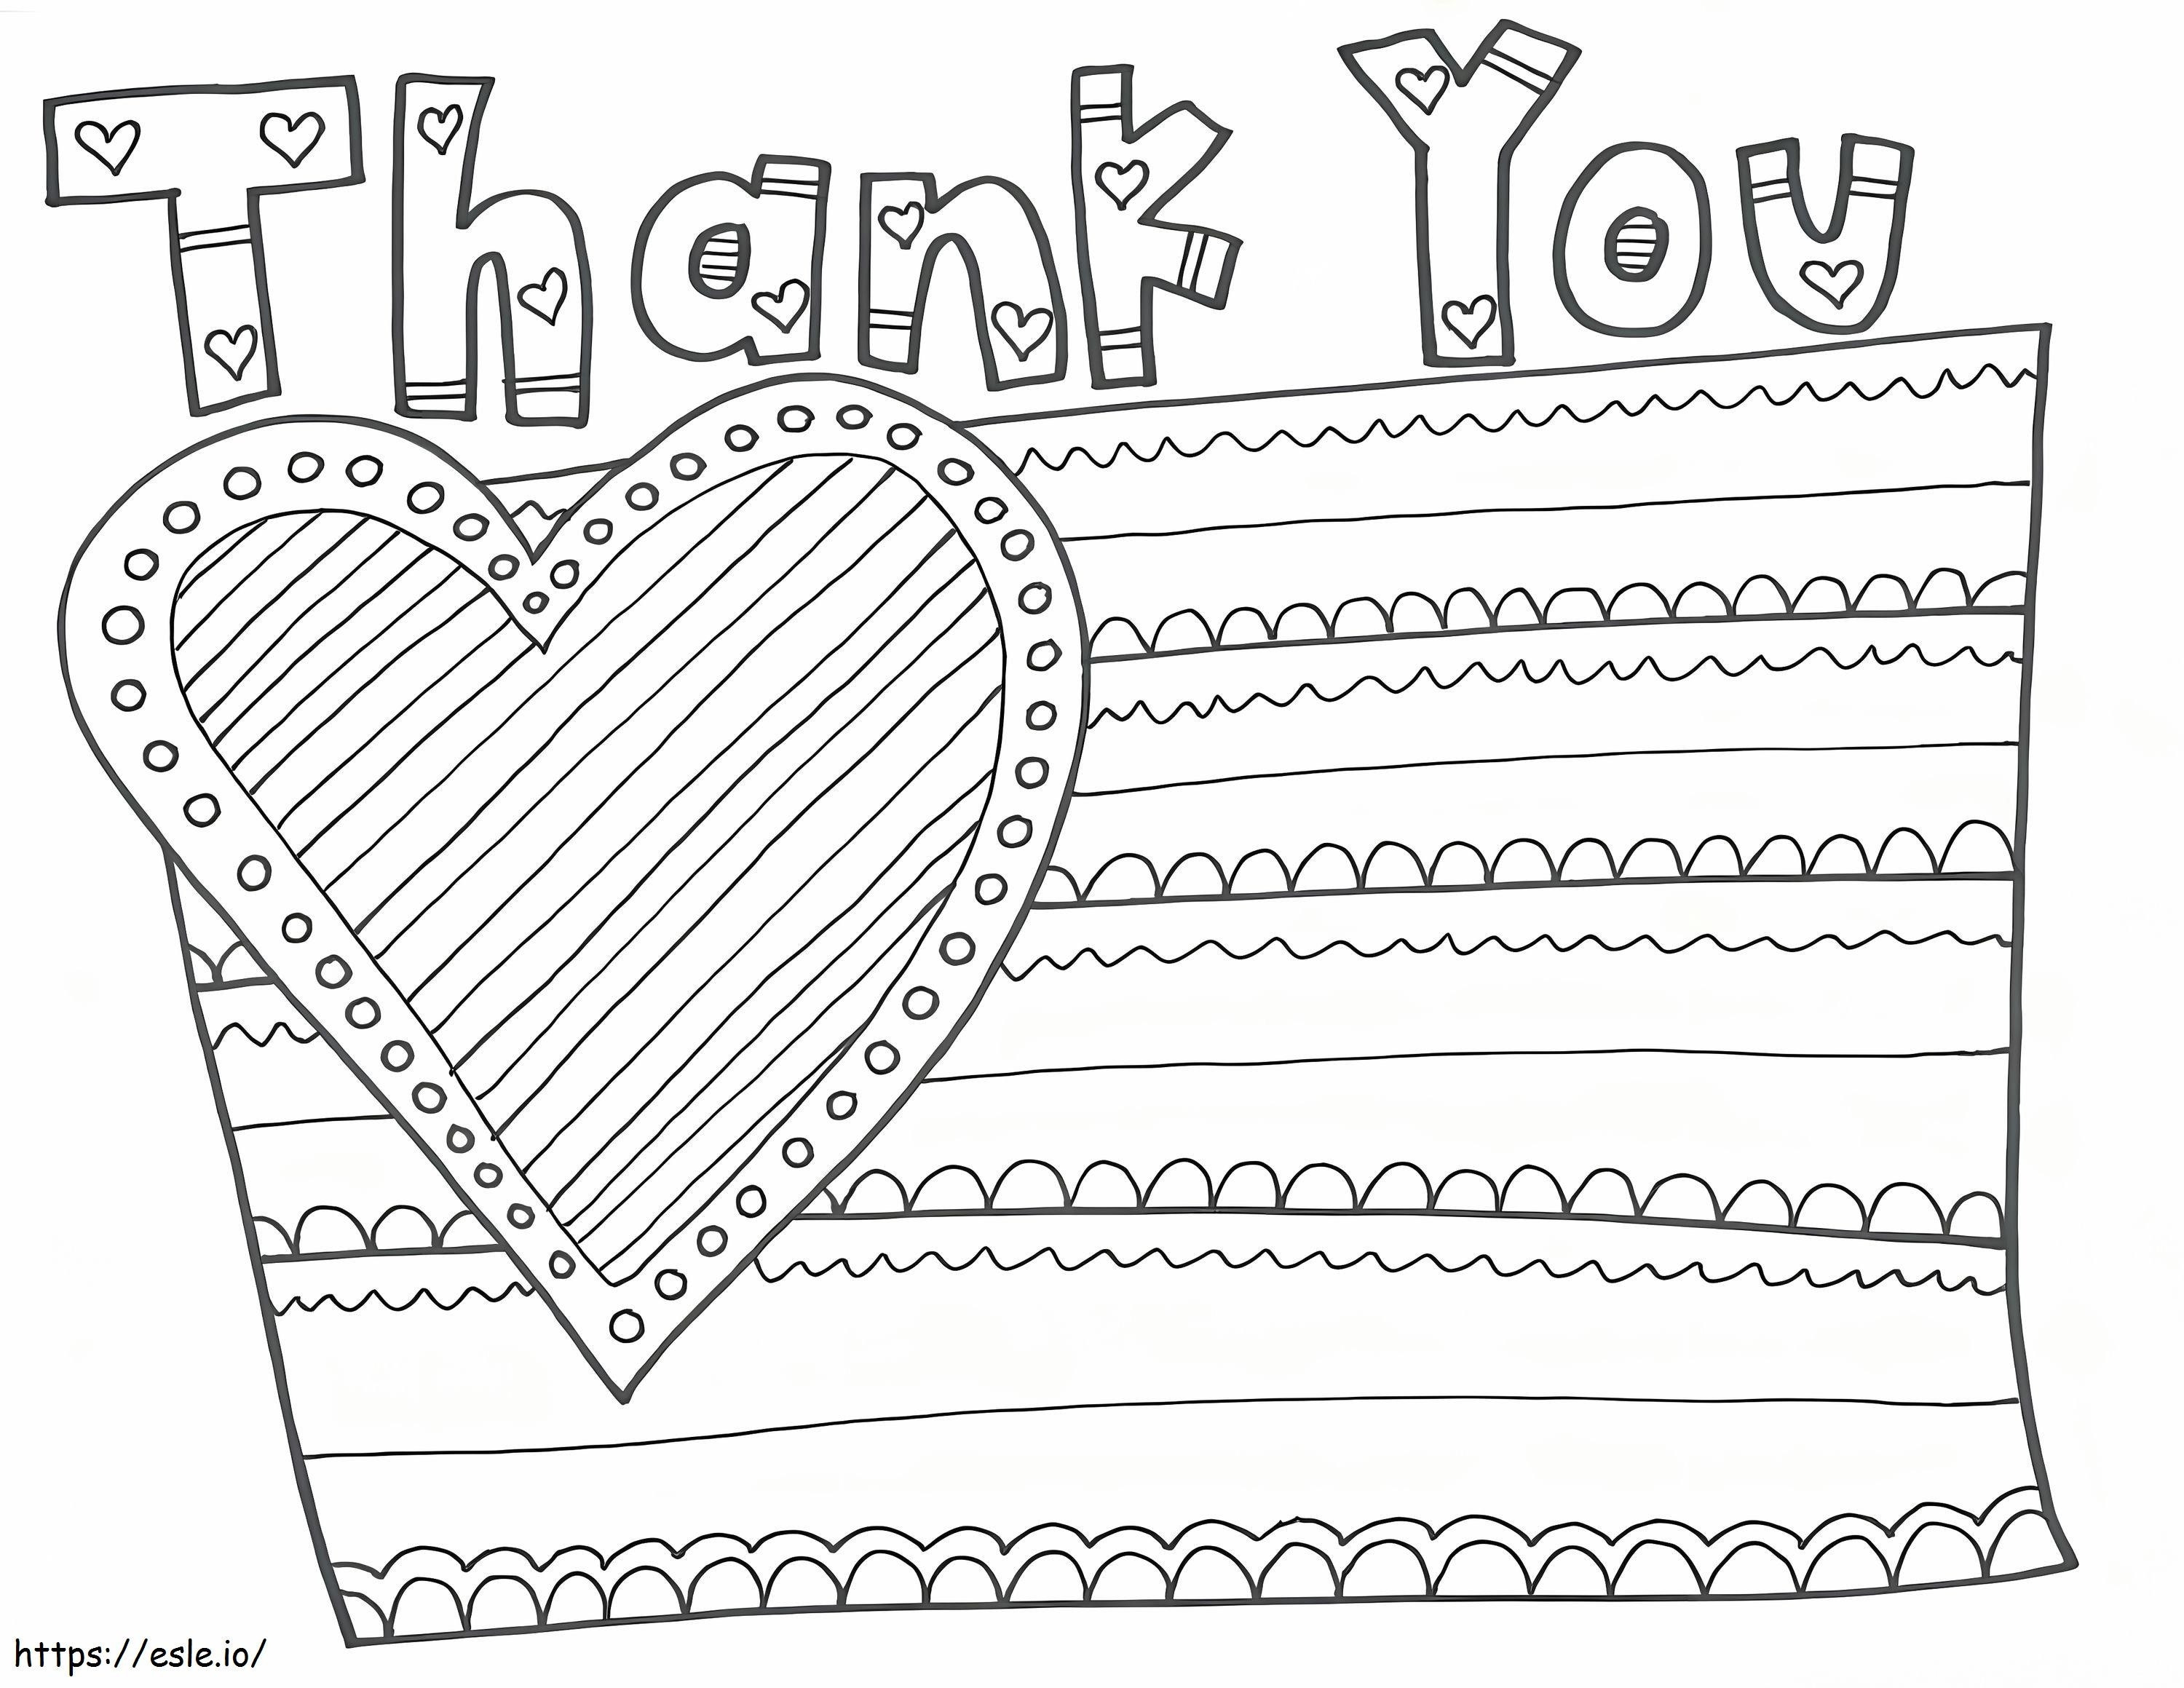 Thank You Veterans 1 coloring page